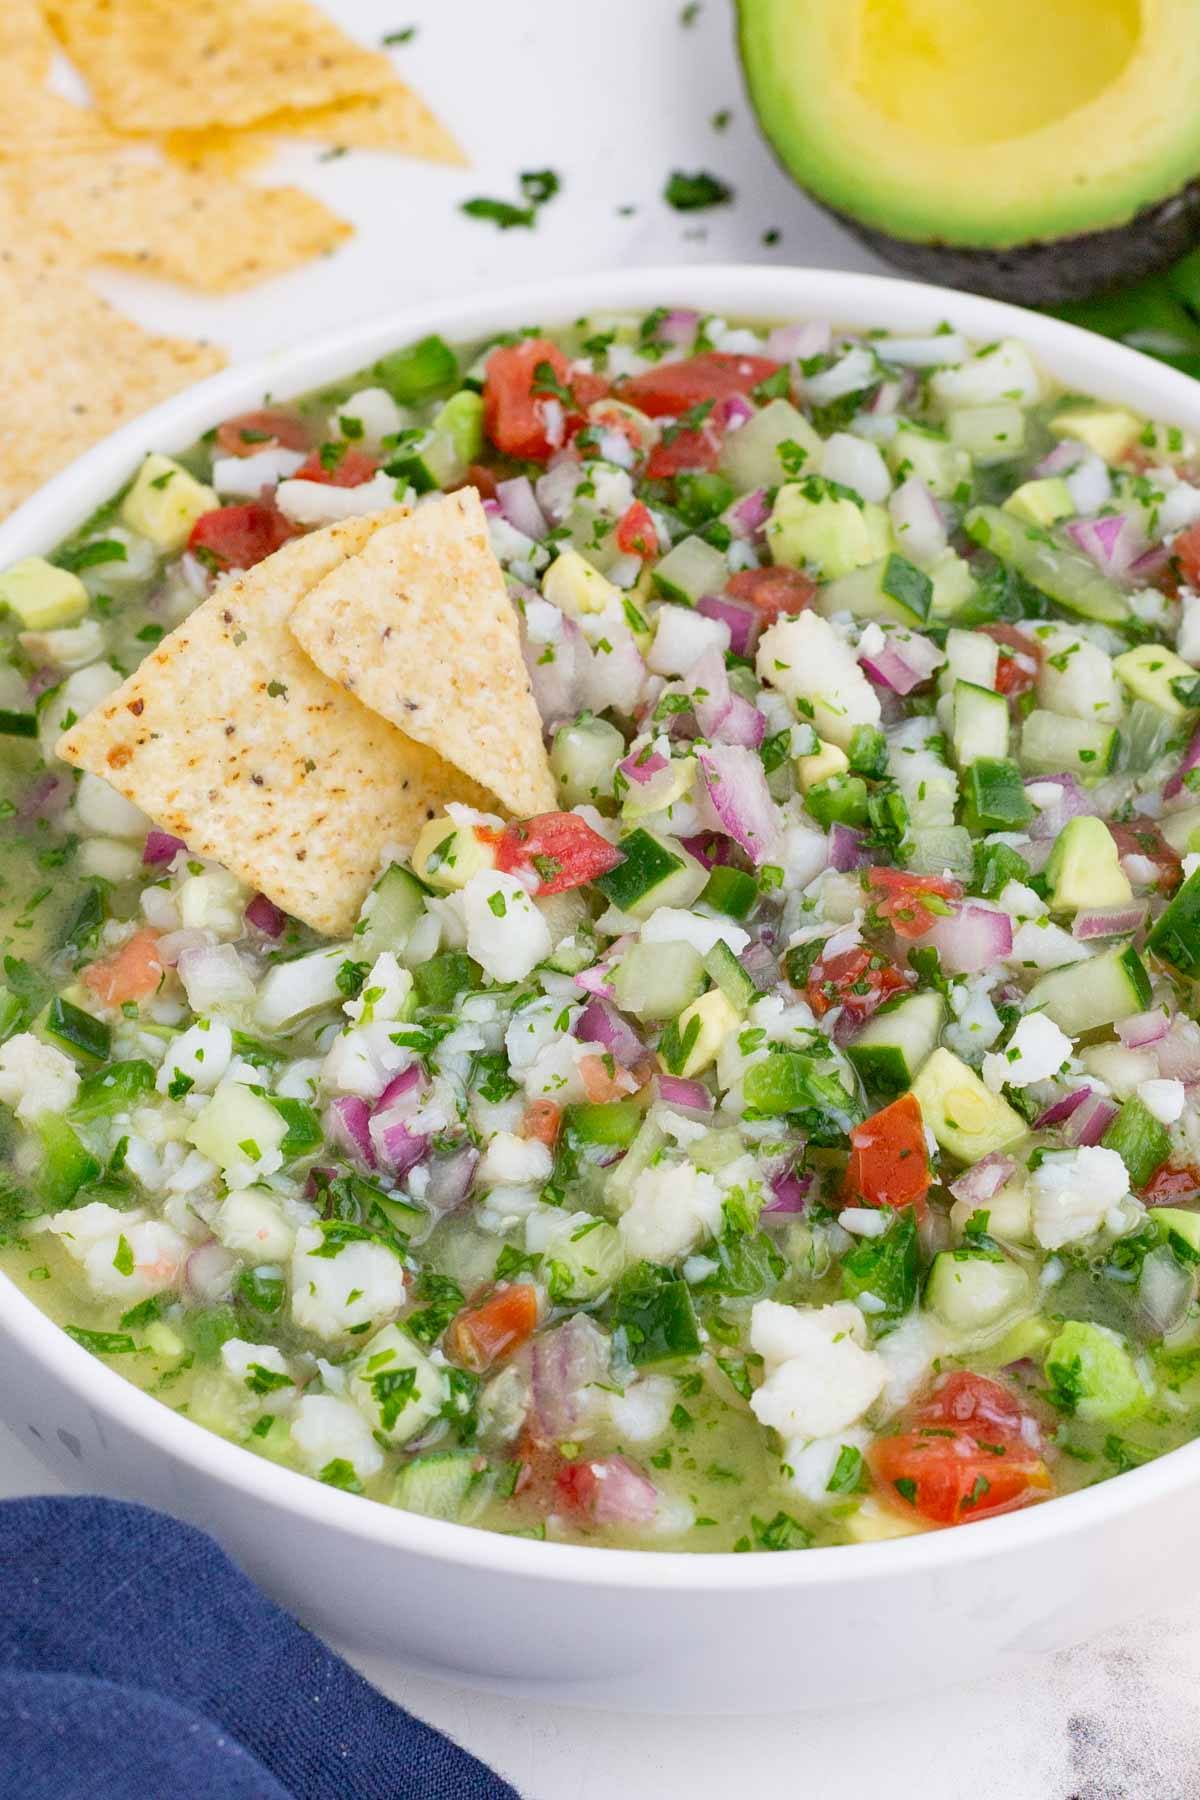 A Mexican dip made with bite-sized fish, avocado, cucumber, and tomato in a glass bowl.